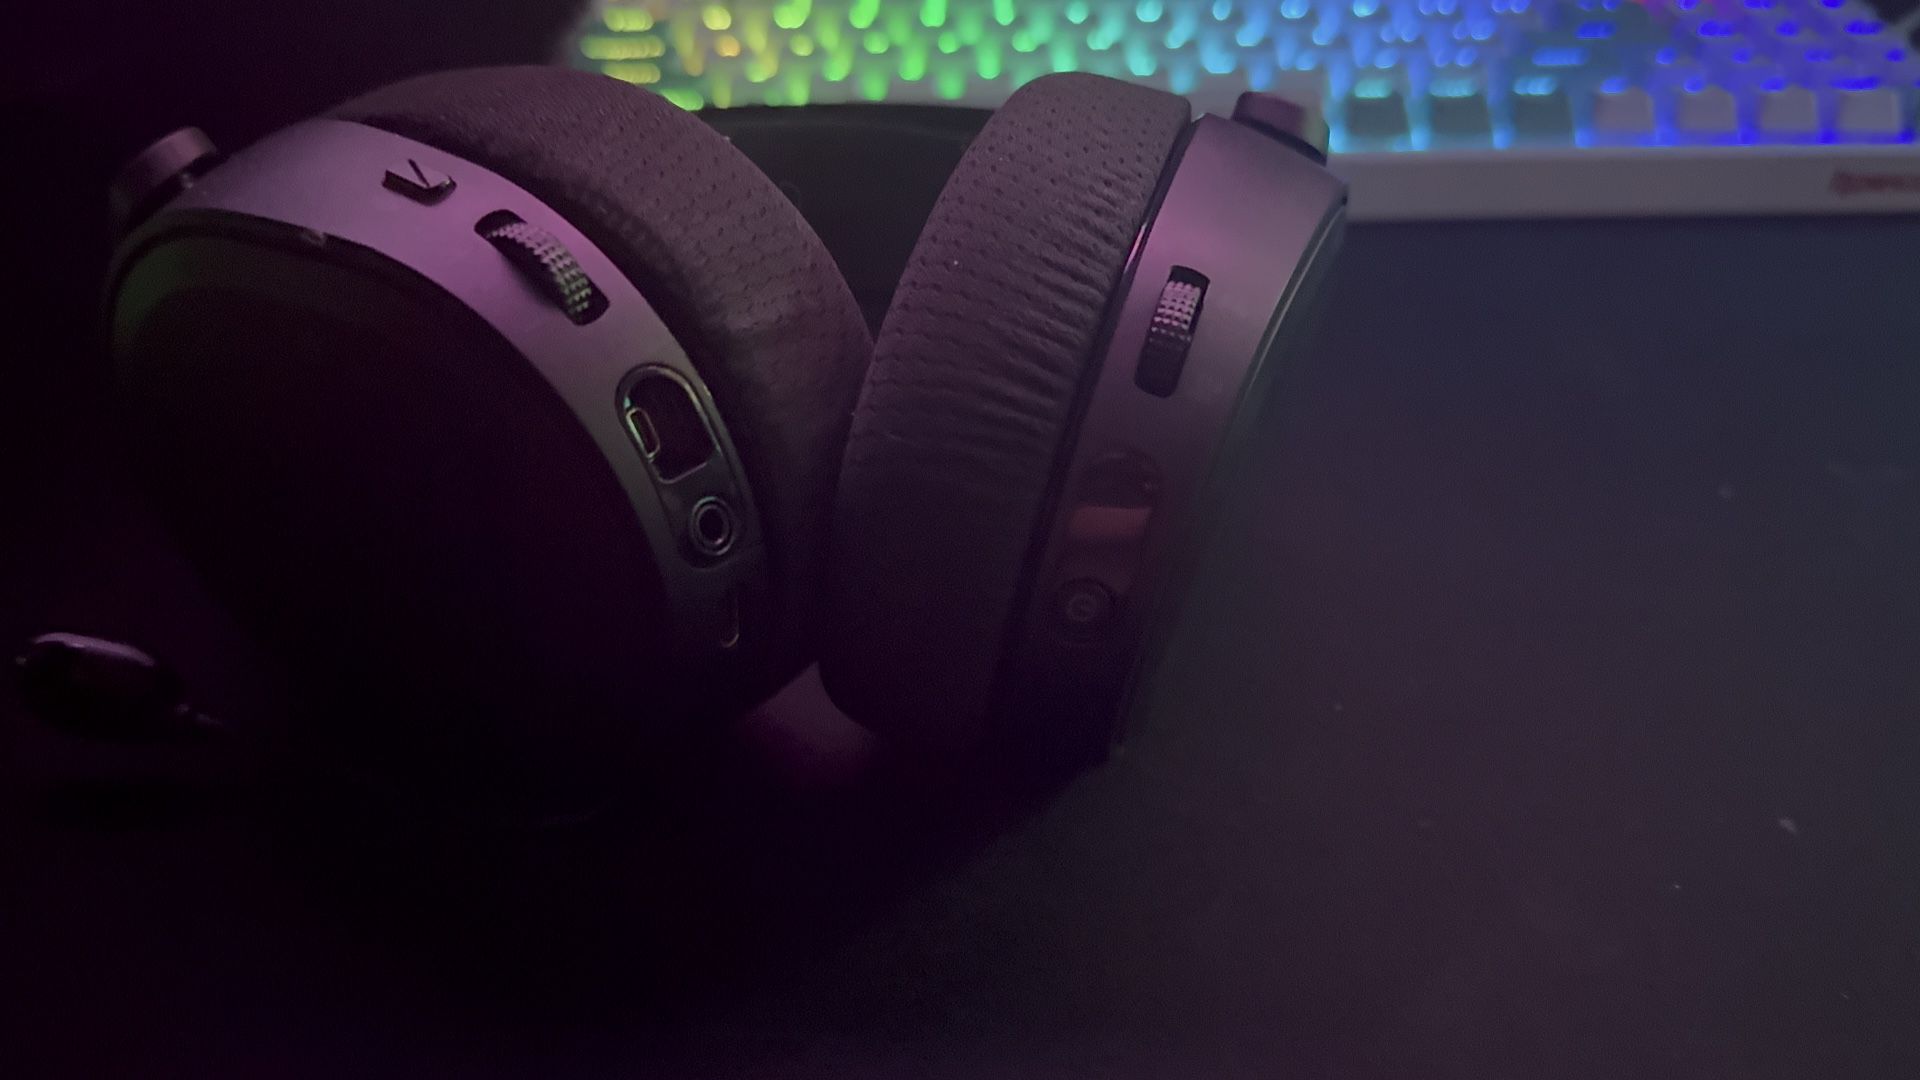 Steelseries Arctis 7+ Wireless gaming headset Works with everything